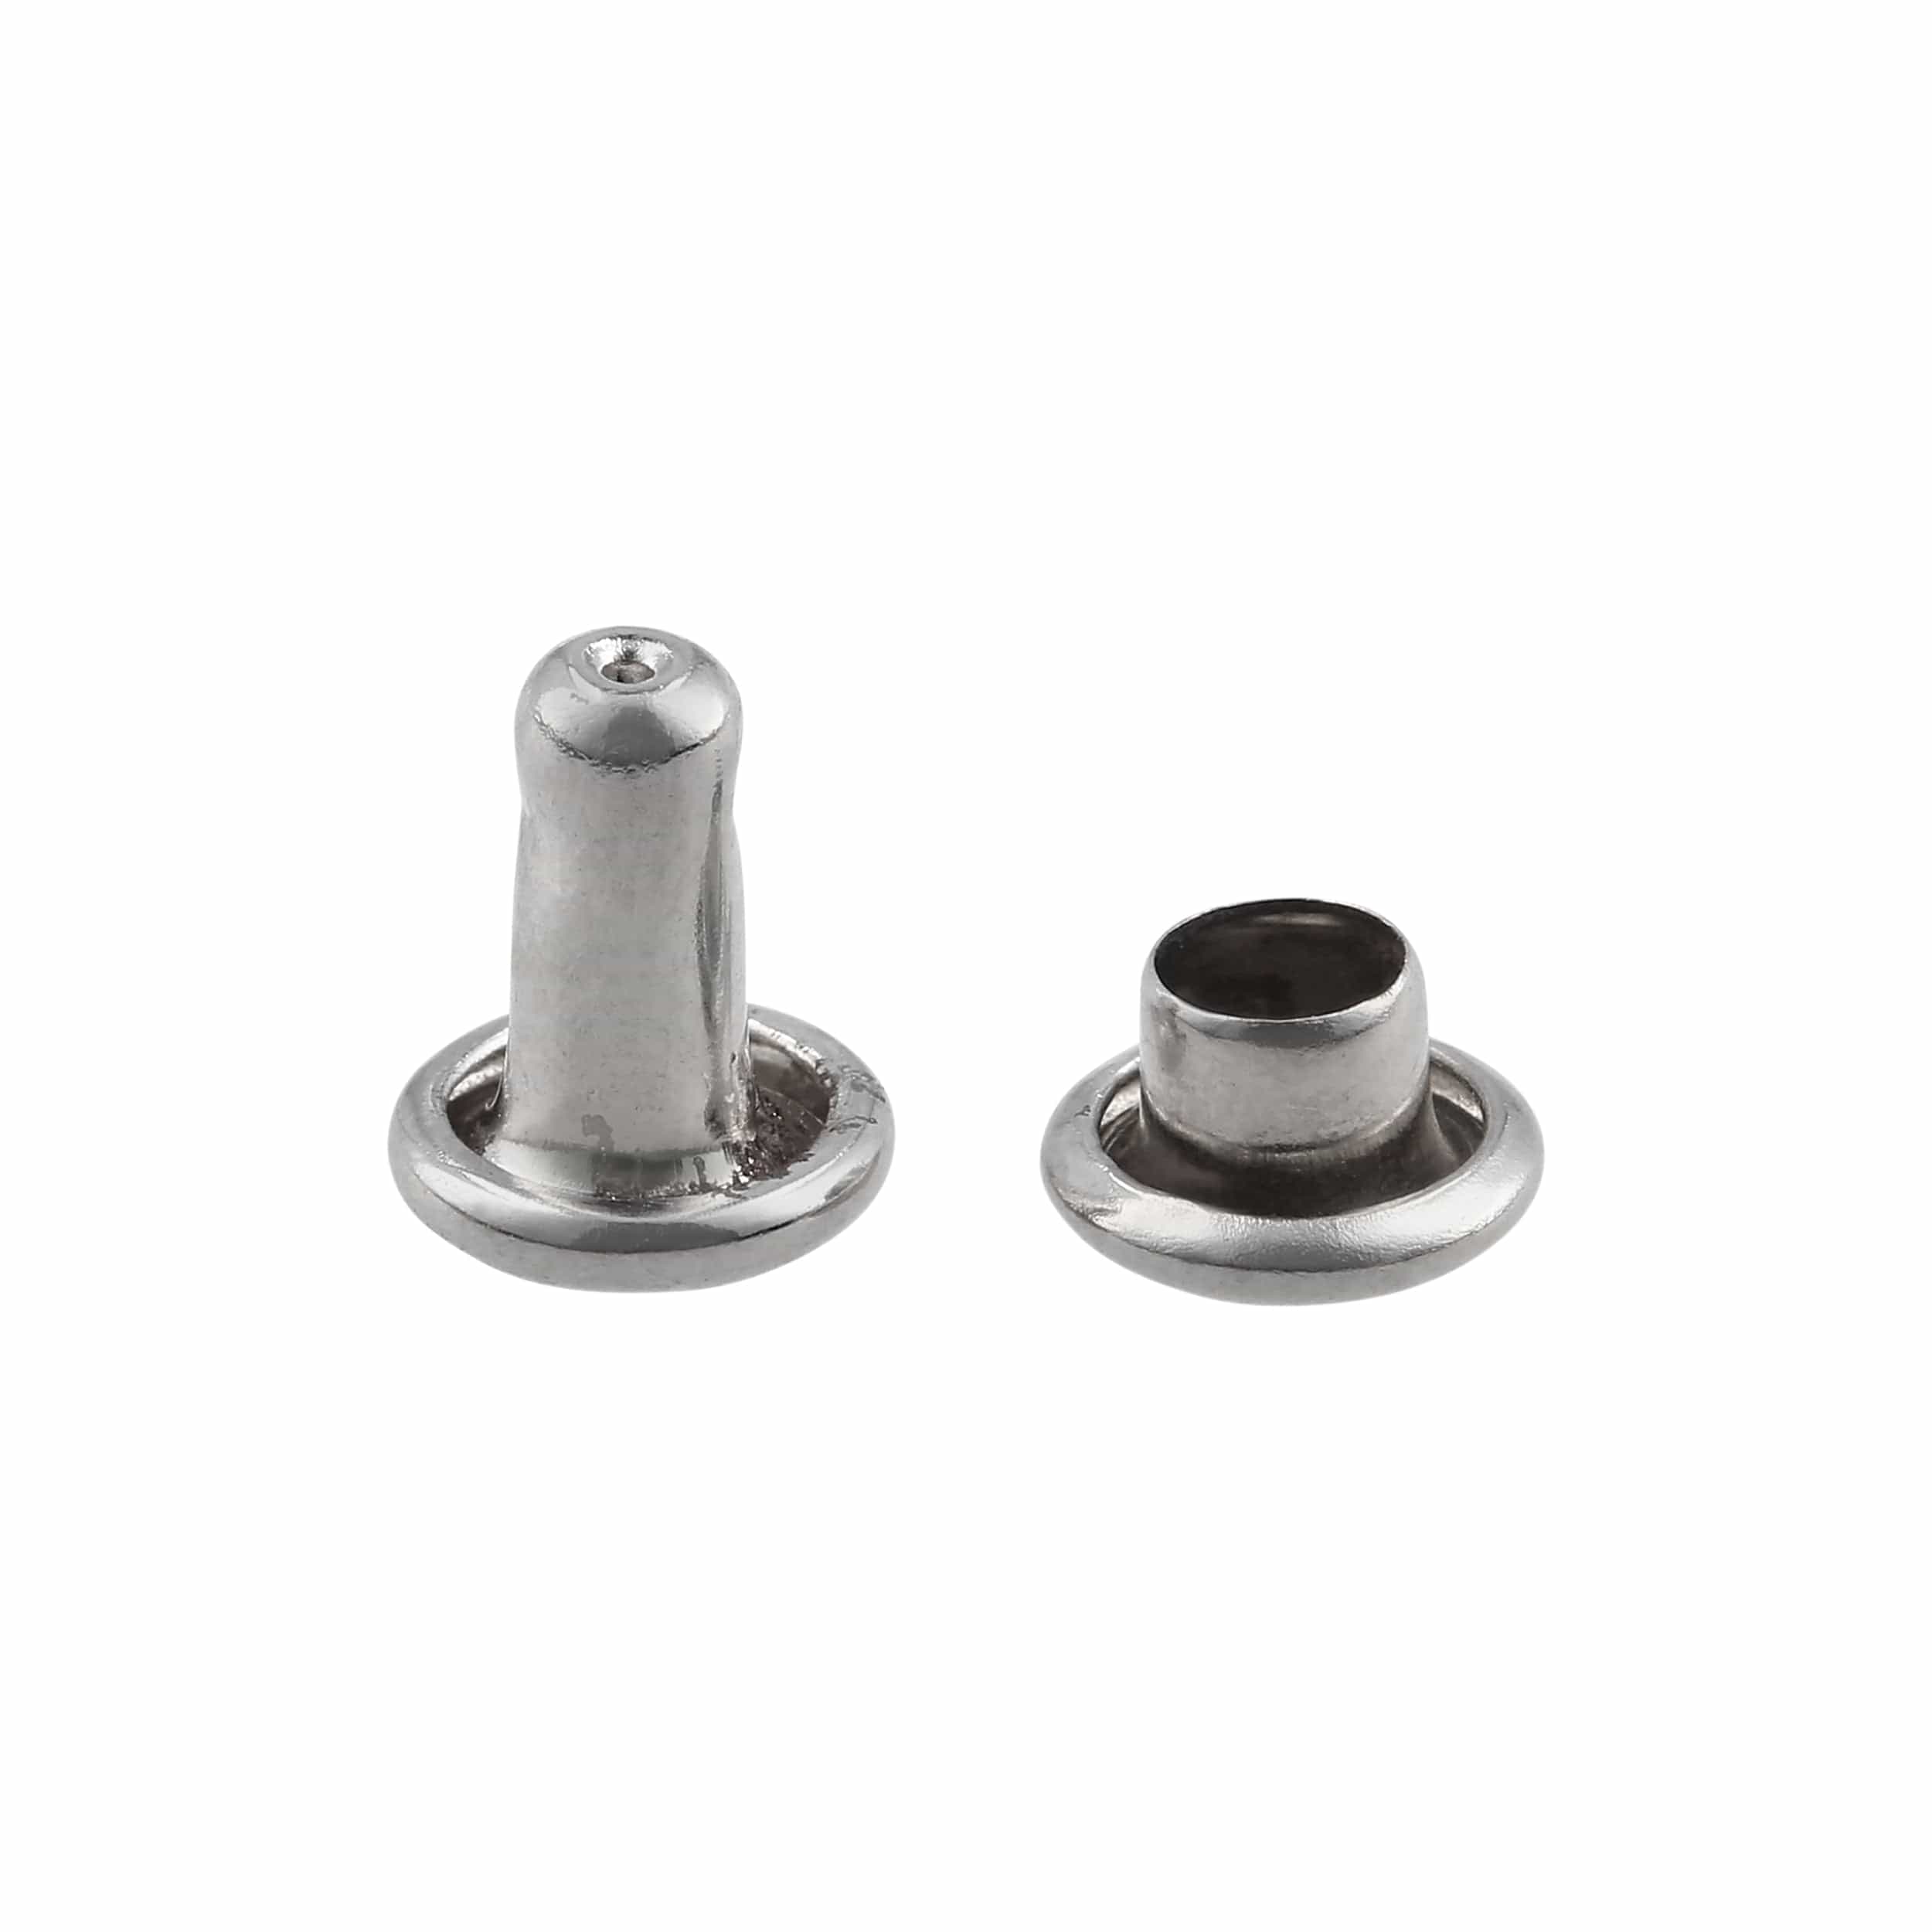 Ohio Travel Bag Fasteners 6mm Nickel, Double Cap Jiffy Rivet, Steel, #A-340-NP A-340-NP